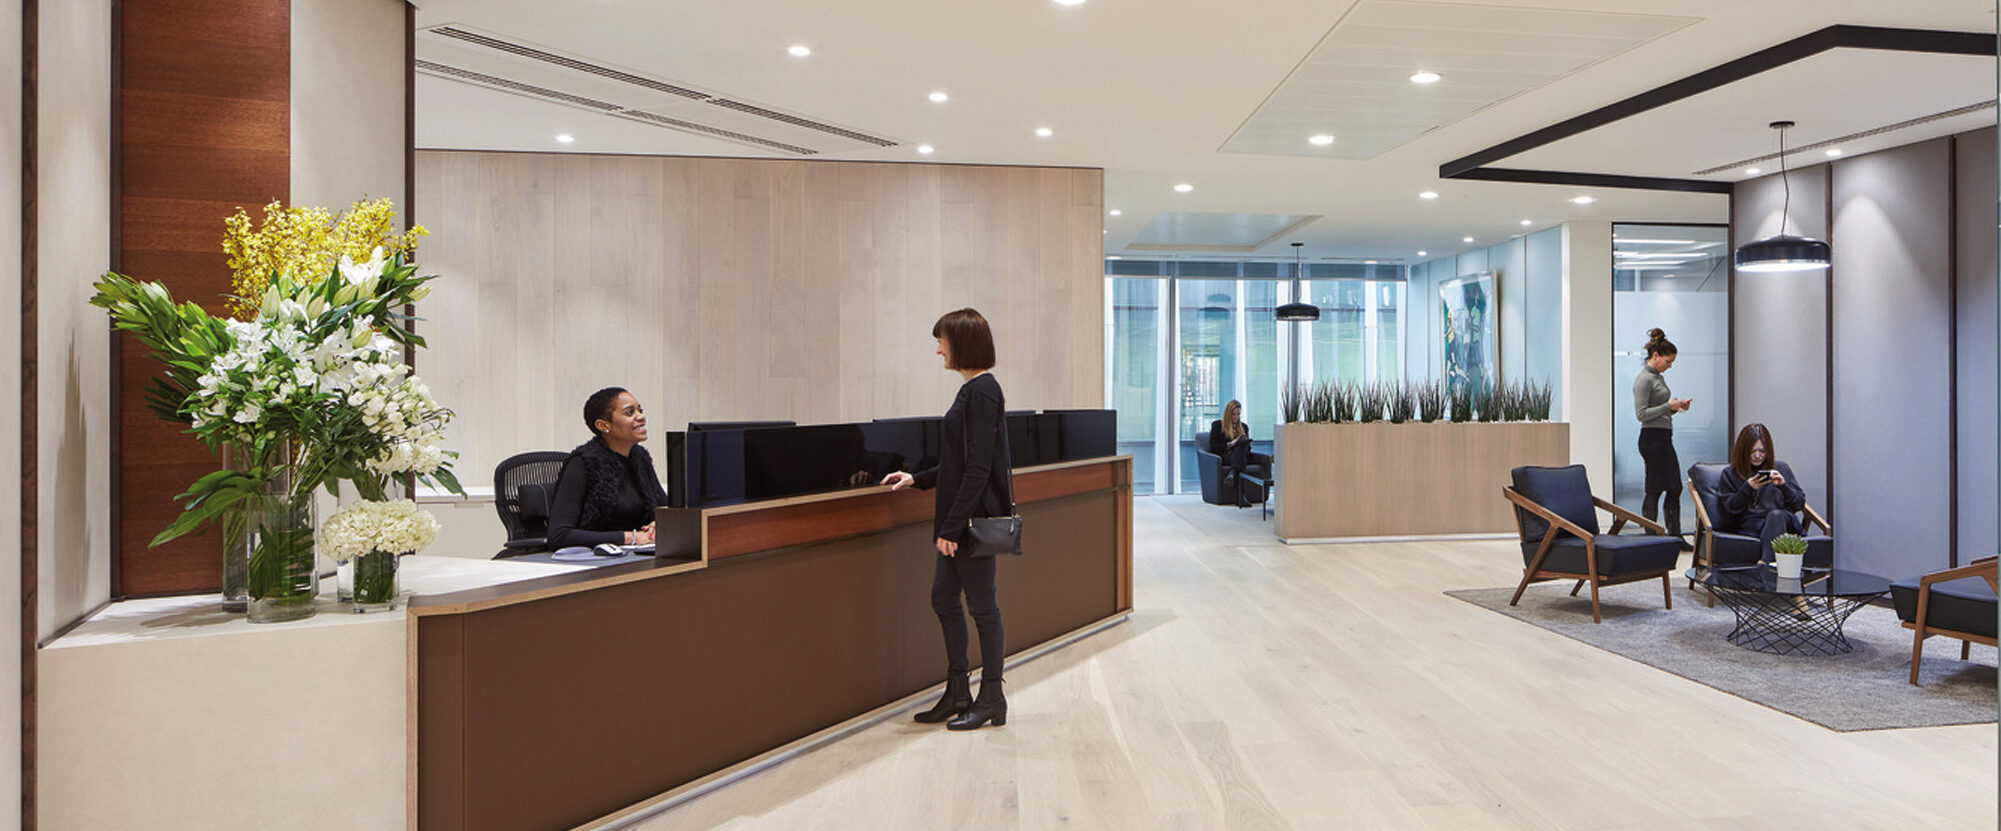 Modern office lobby with light wood floors, a sleek reception desk, and a casual seating area. Neutral tones with natural light give the space a welcoming ambience. Contemporary art pieces adorn the walls, enhancing the professional yet comfortable environment.